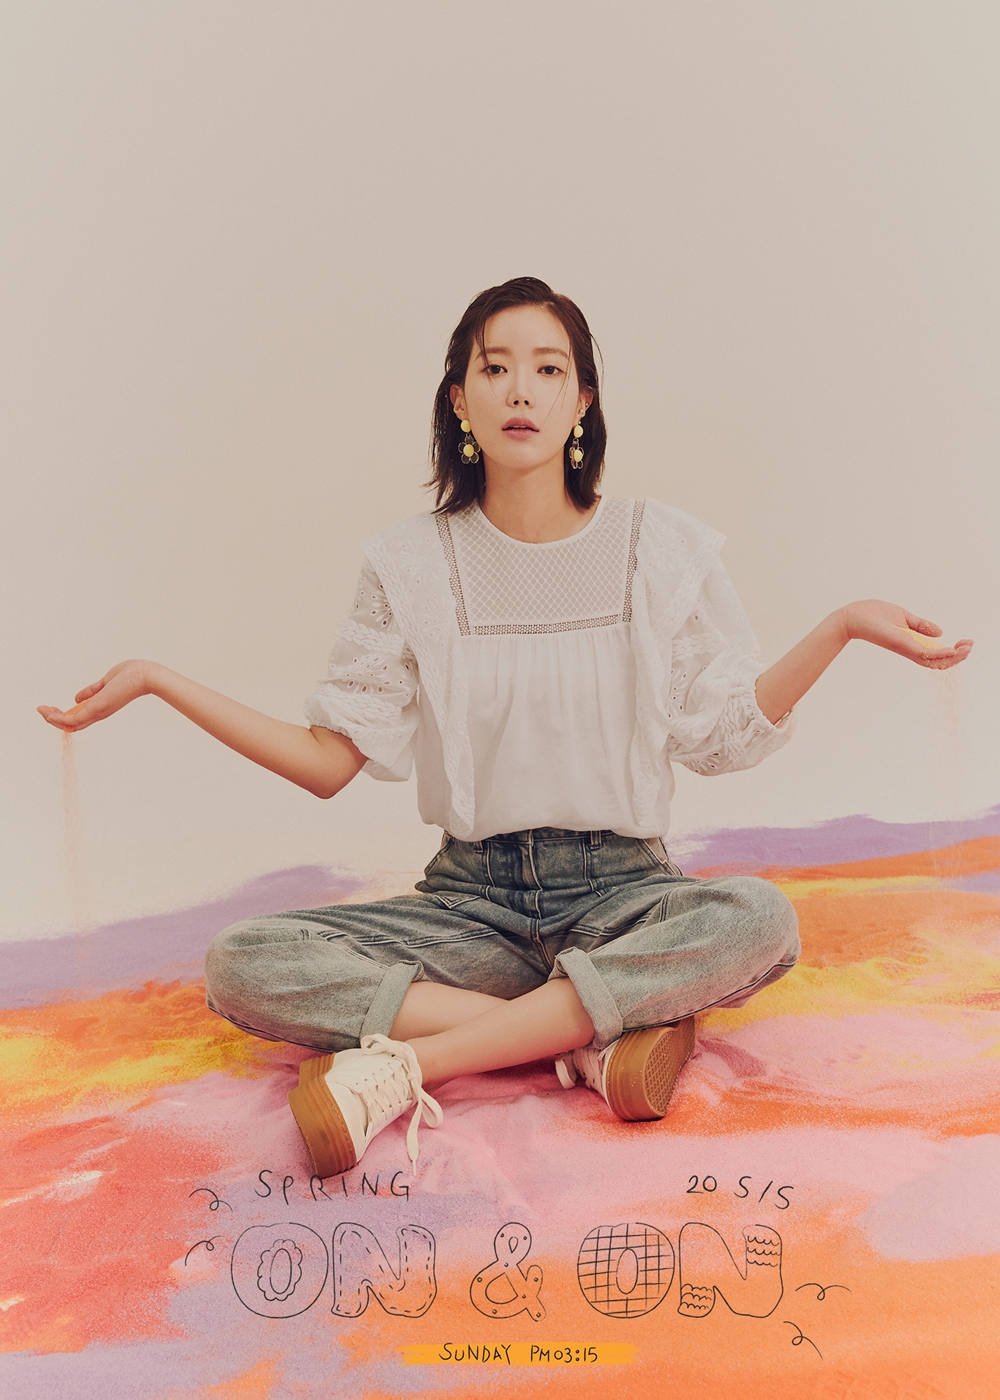 Actor Im Soo-hyang has presented a variety of lovely spring fashions.Recently, the womens wear brand On & On (ON & ON) released a 20SS project pictorial Sunday (SUNDAY) p.m. 3:15 with Im Soo-hyang.This photo is based on Sunday afternoon, when 2030 women do a lot of personal things that they have delayed on weekdays. I borrowed keywords from Im Soo-hyangs routine.Im Soo-hyang in the public picture showed a pure charm wearing a neat white roper in a subtle floral pattern One Piece.In another pictorial, Im Soo-hyang created a girly look by matching socks and sandals to a creamy long one piece with a rich puff and wide collar.Im Soo-hyang also produced a casual mood by matching vintage Denim pants to a blouse with a variety of eyelet points.On the other hand, On & Ons 20SS items worn by Im Soo-hyang in the picture will be released sequentially, and can be found at the official online store Roundge B and the department store on and on store nationwide.